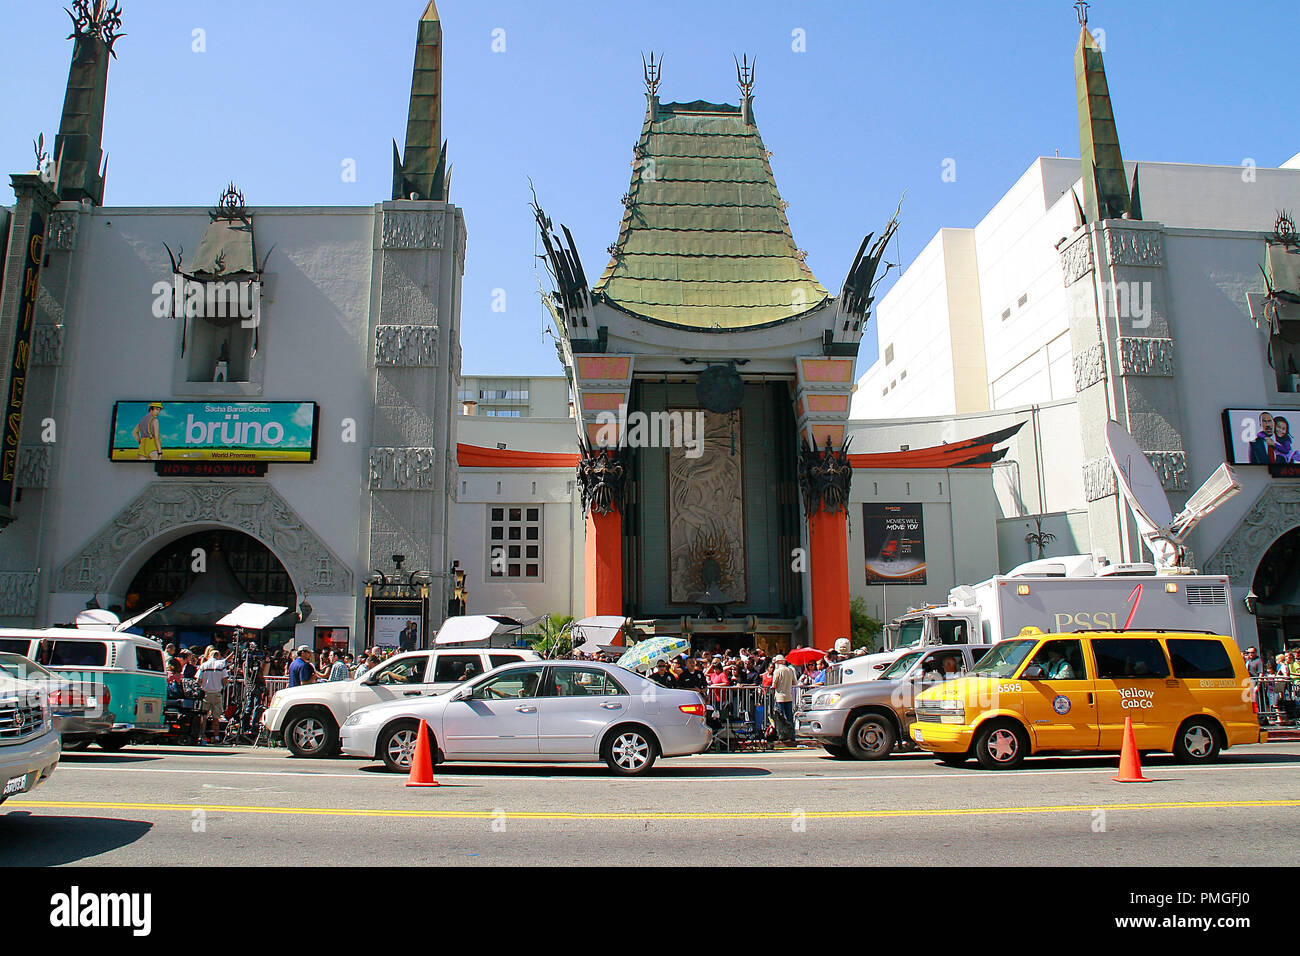 Media and fans converge on the Hollywood walk of fame to pay their respects to Michael Jackson at the make-shift shrine created on top of his Star in front of Grauman's Chinese Theatre in Hollywood, CA, June 27, 2009.  © Joseph Martinez / Picturelux - All Rights Reserved  File Reference # 30035 007PLX   For Editorial Use Only -  All Rights Reserved Stock Photo